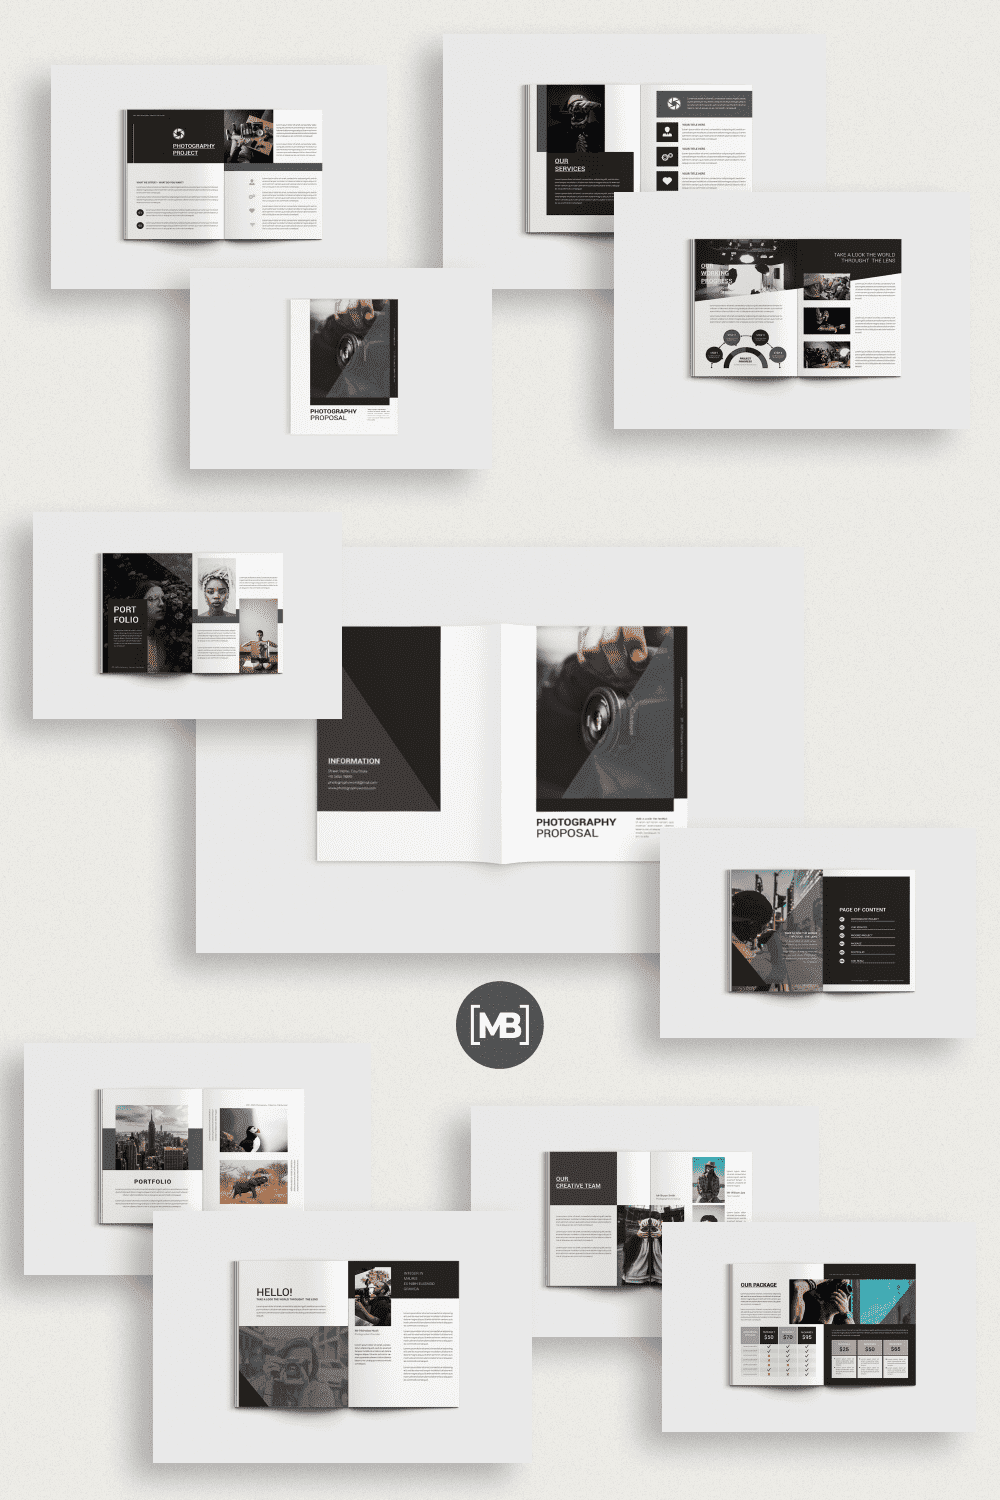 Photography proposal template.